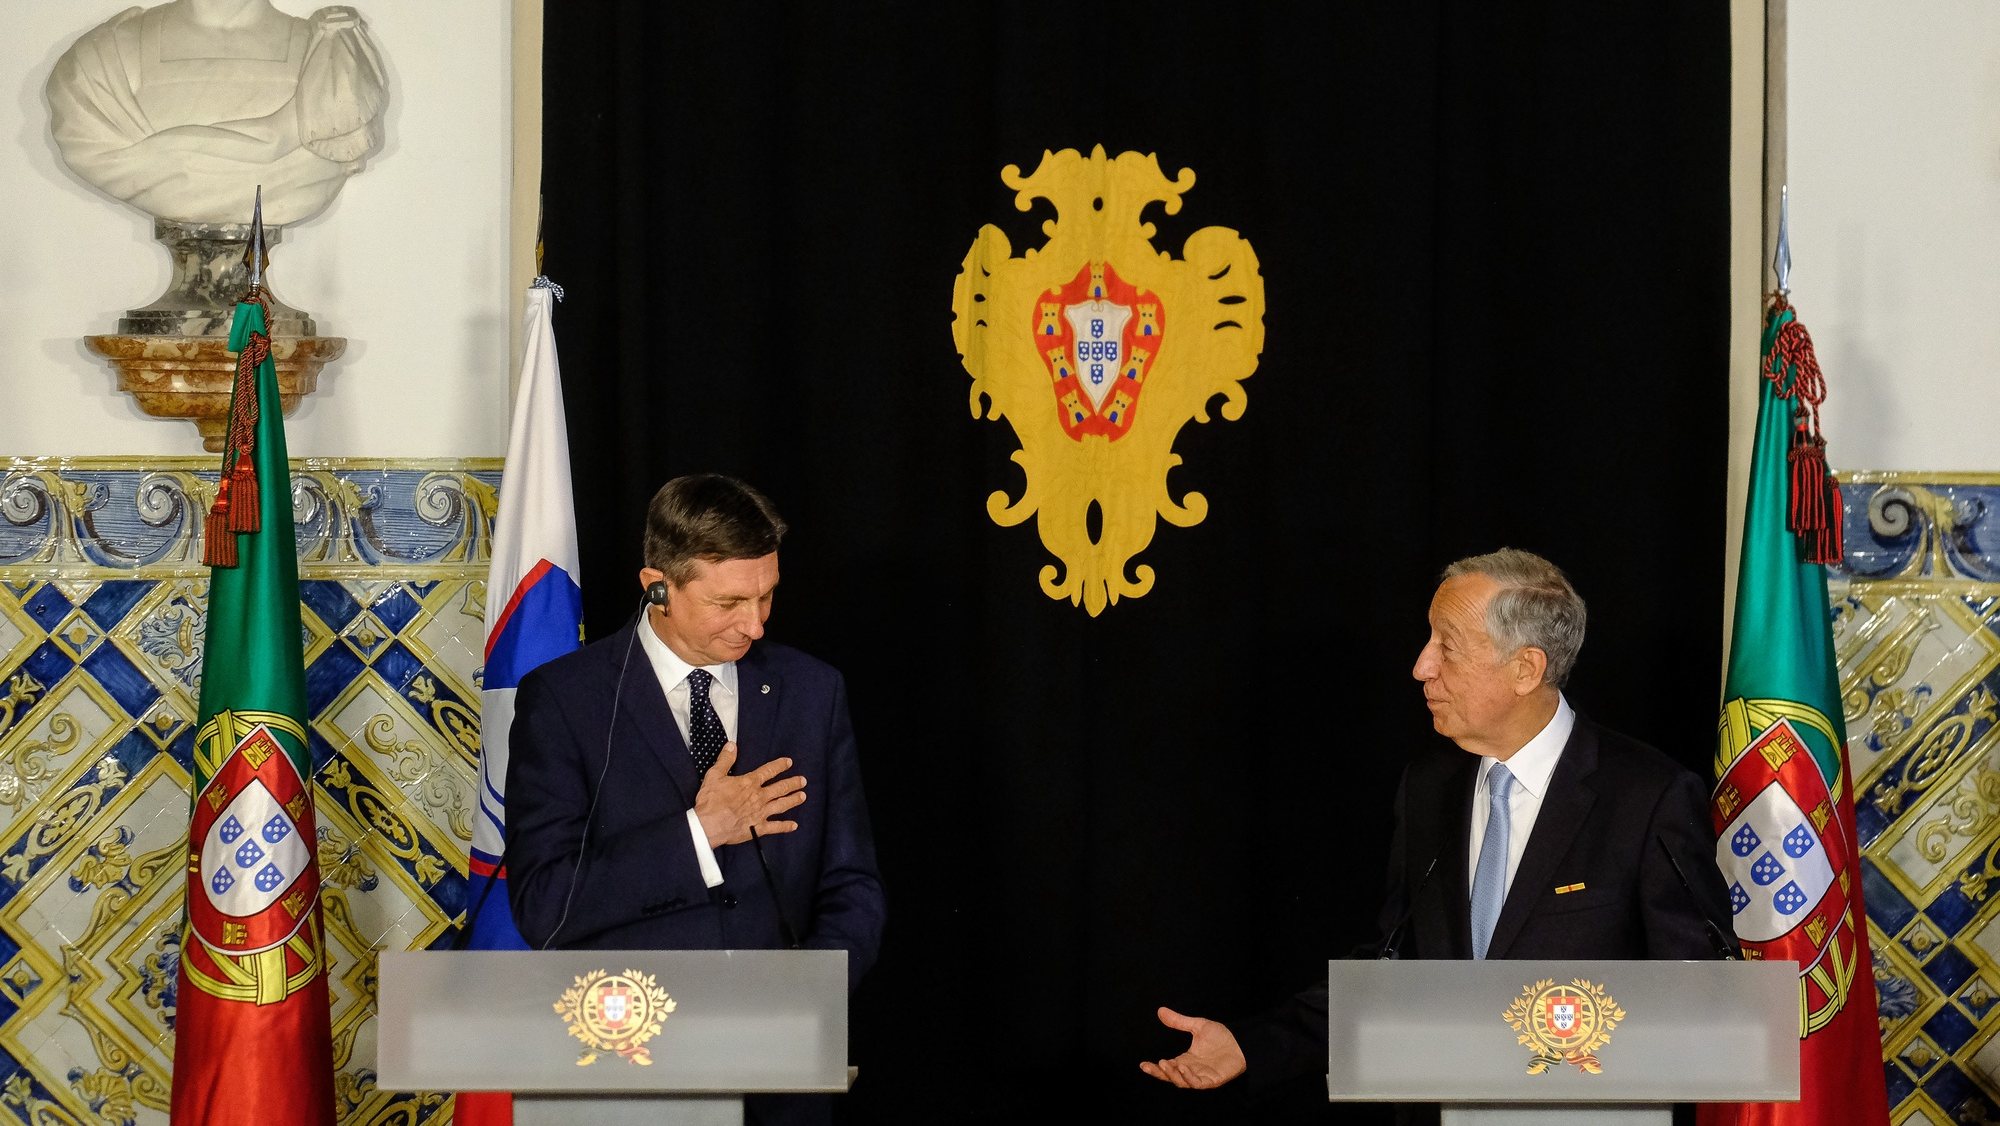 Portugal&#039;s President Marcelo Rebelo de Sousa (R) accompanied by Slovenia&#039;s President Borut Pahor (L) attend a press conference after their meeting at Belem Palace, in Lisbon, Portugal, 14 February 2022. Borut Pahor is on a two-day official visit to Portugal. MÁRIO CRUZ/LUSA